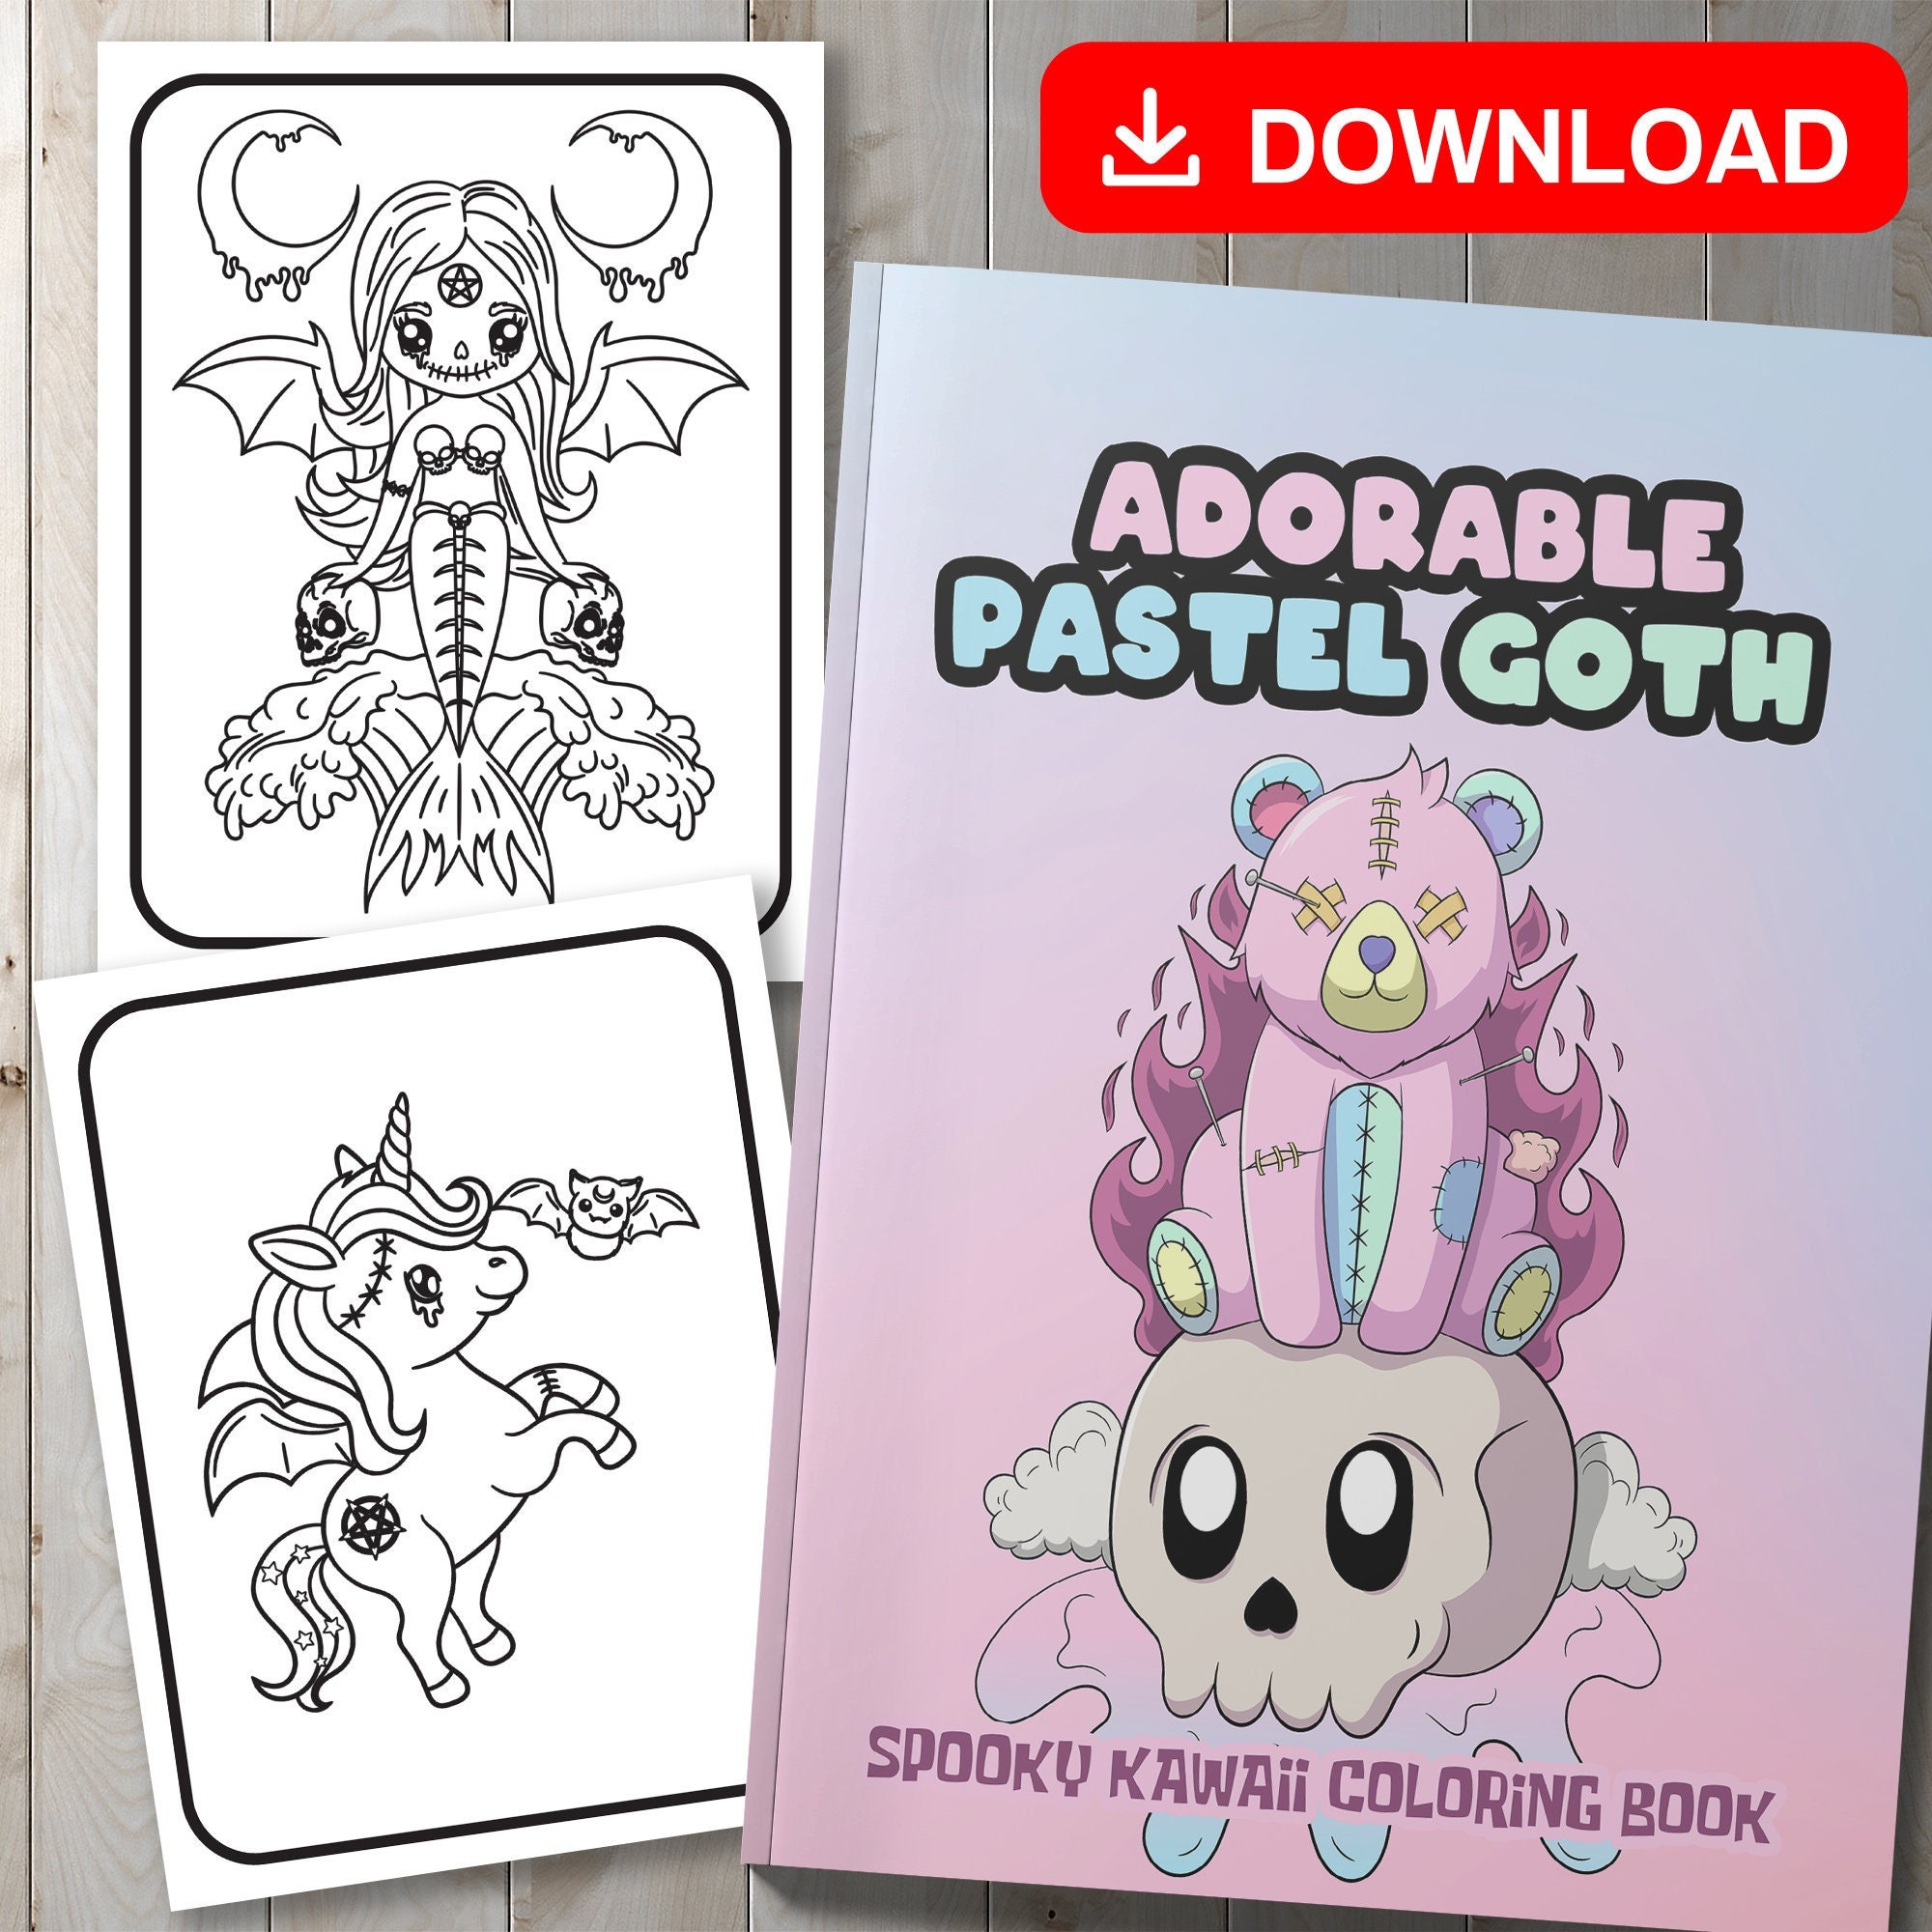 Pastel Goth Cute Coloring Book: Creepy Kawaii Colouring Book WIth Adorable  And Spooky Coloring Pages (Paperback)